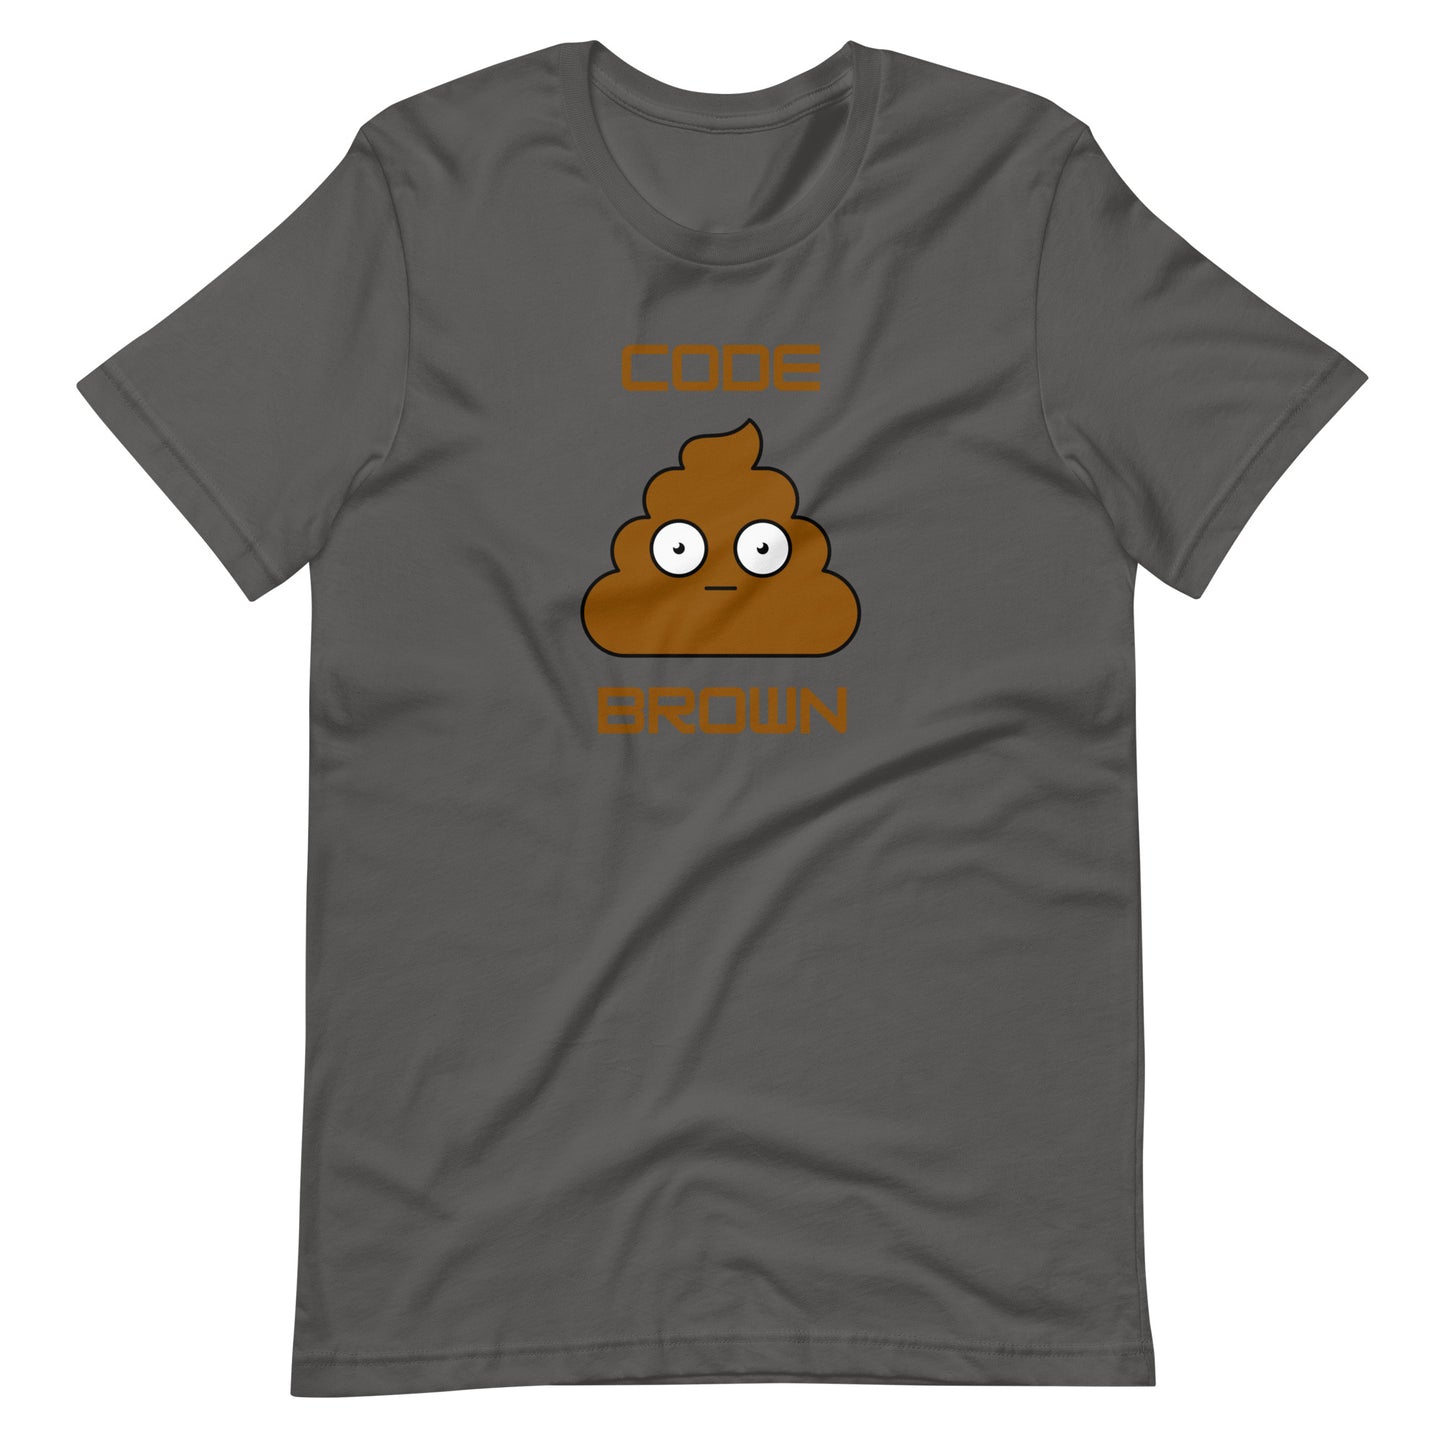 Graphic Tee, Code Brown, CNA, Funny Doctor Shirt, Medical Student, Funny Nurse Shirt, Funny Resident Shirt, Doctor, Physician, Resident, Nurse, PA, NP, Medical Student